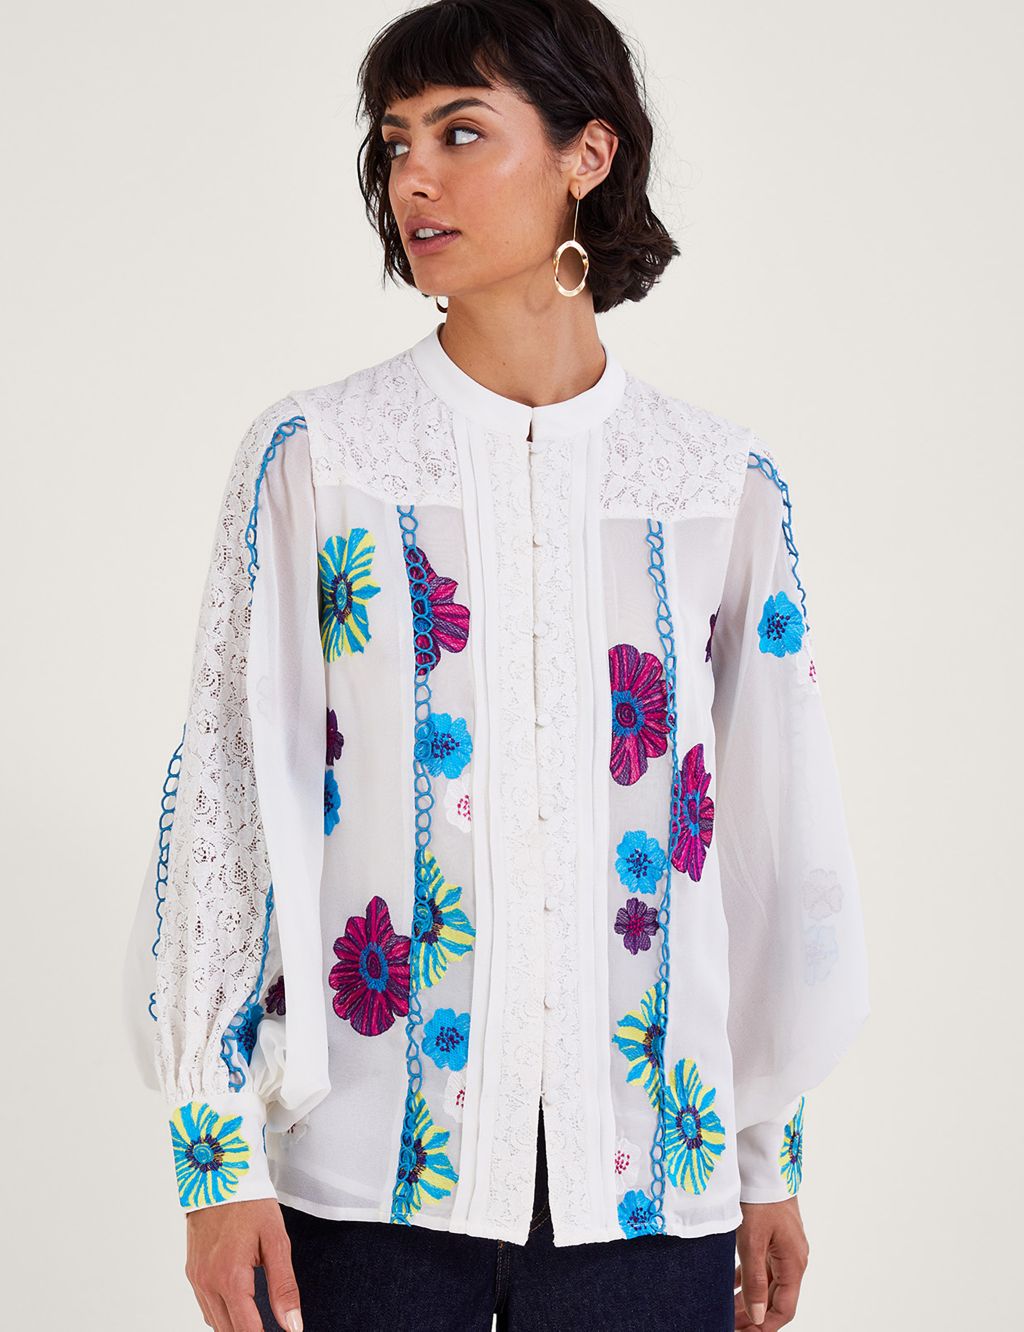 Embroidered High Neck Lace Detail Blouse image 1